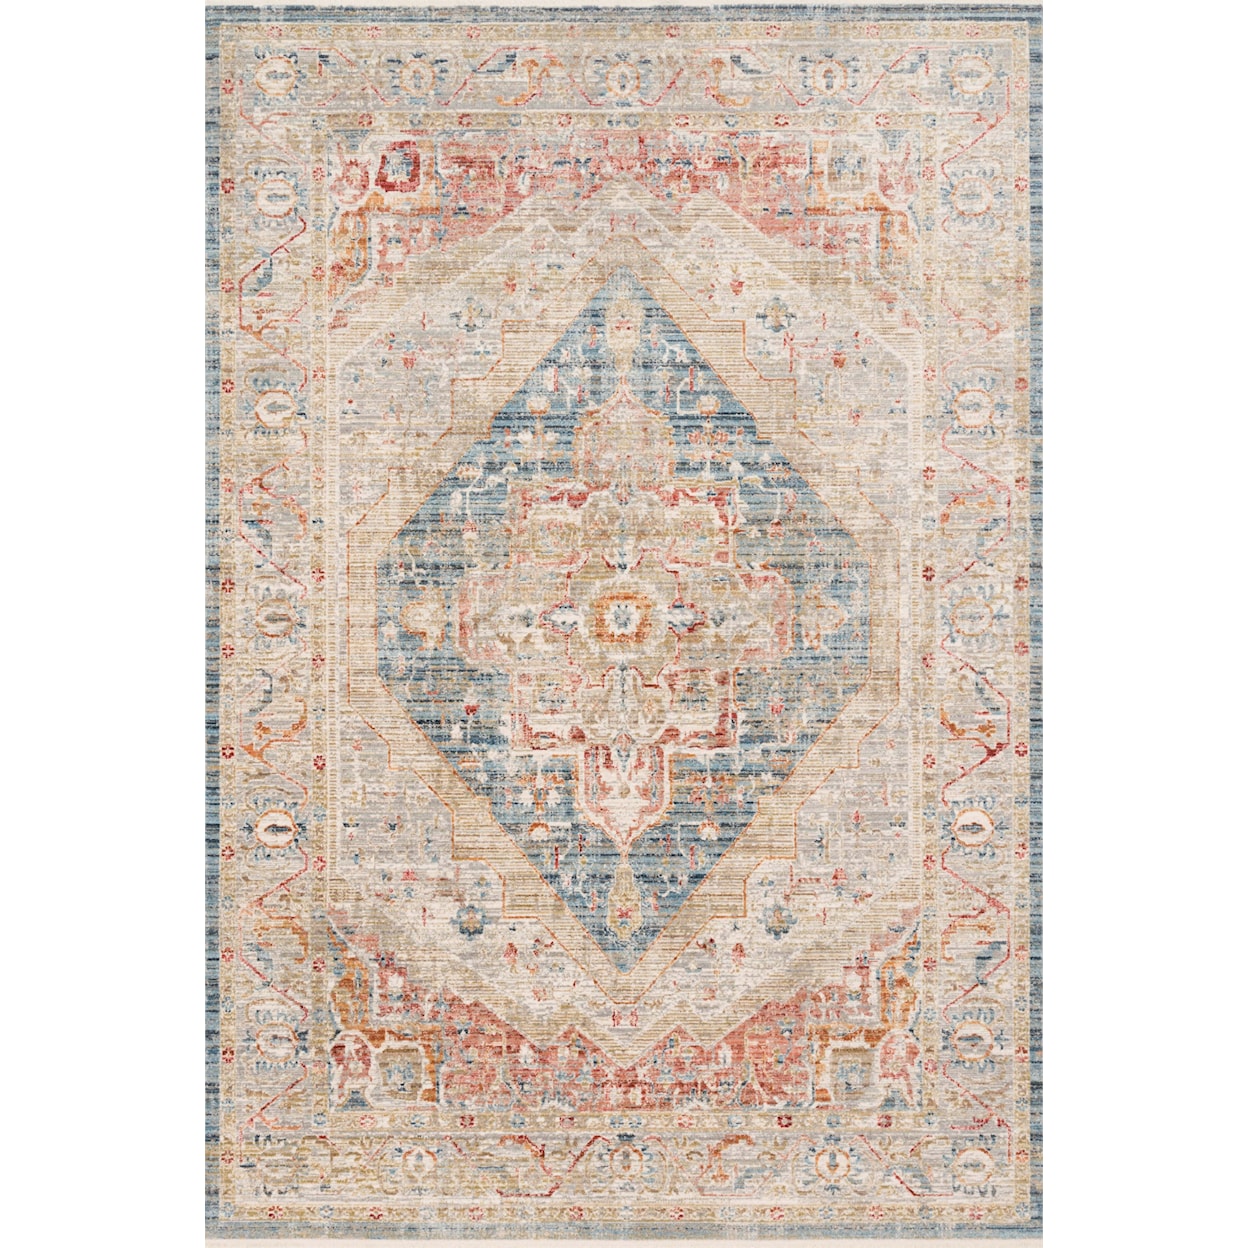 Reeds Rugs Claire 3'7" x 5'1" Blue / Multi Rug